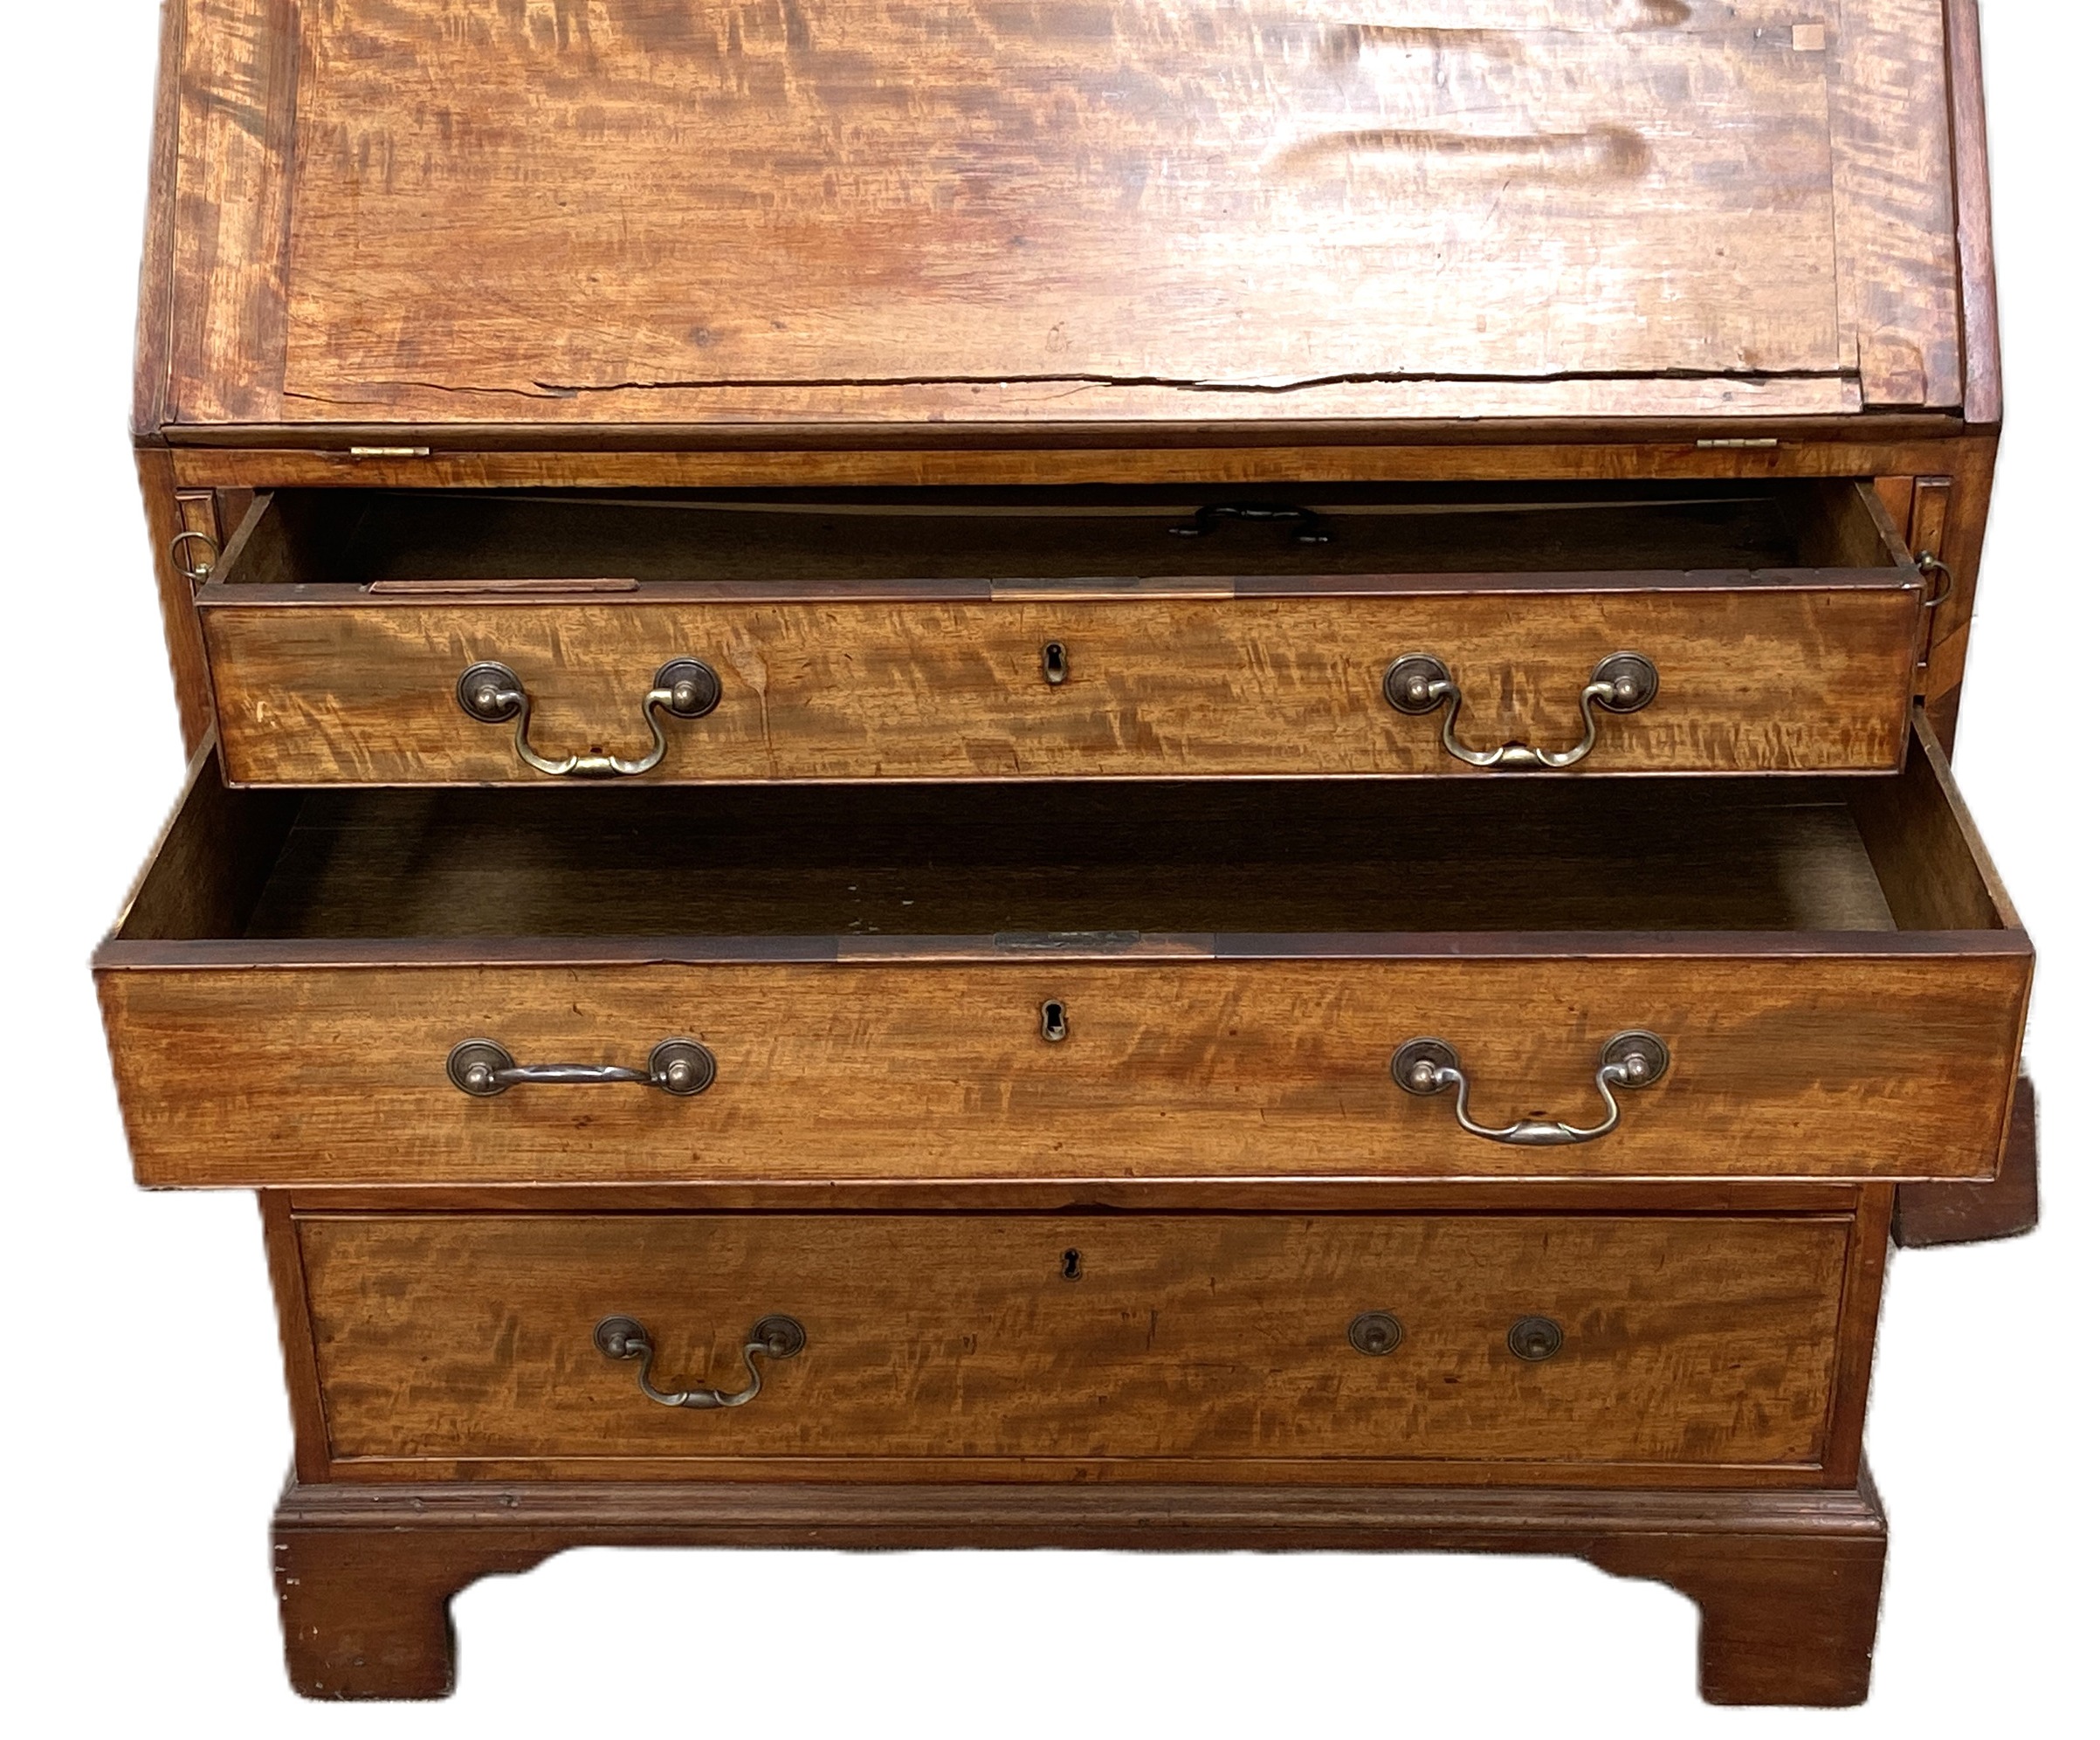 A George III mahogany bureau, late 18th century, with a fall front, opening to arrangement of - Image 6 of 6